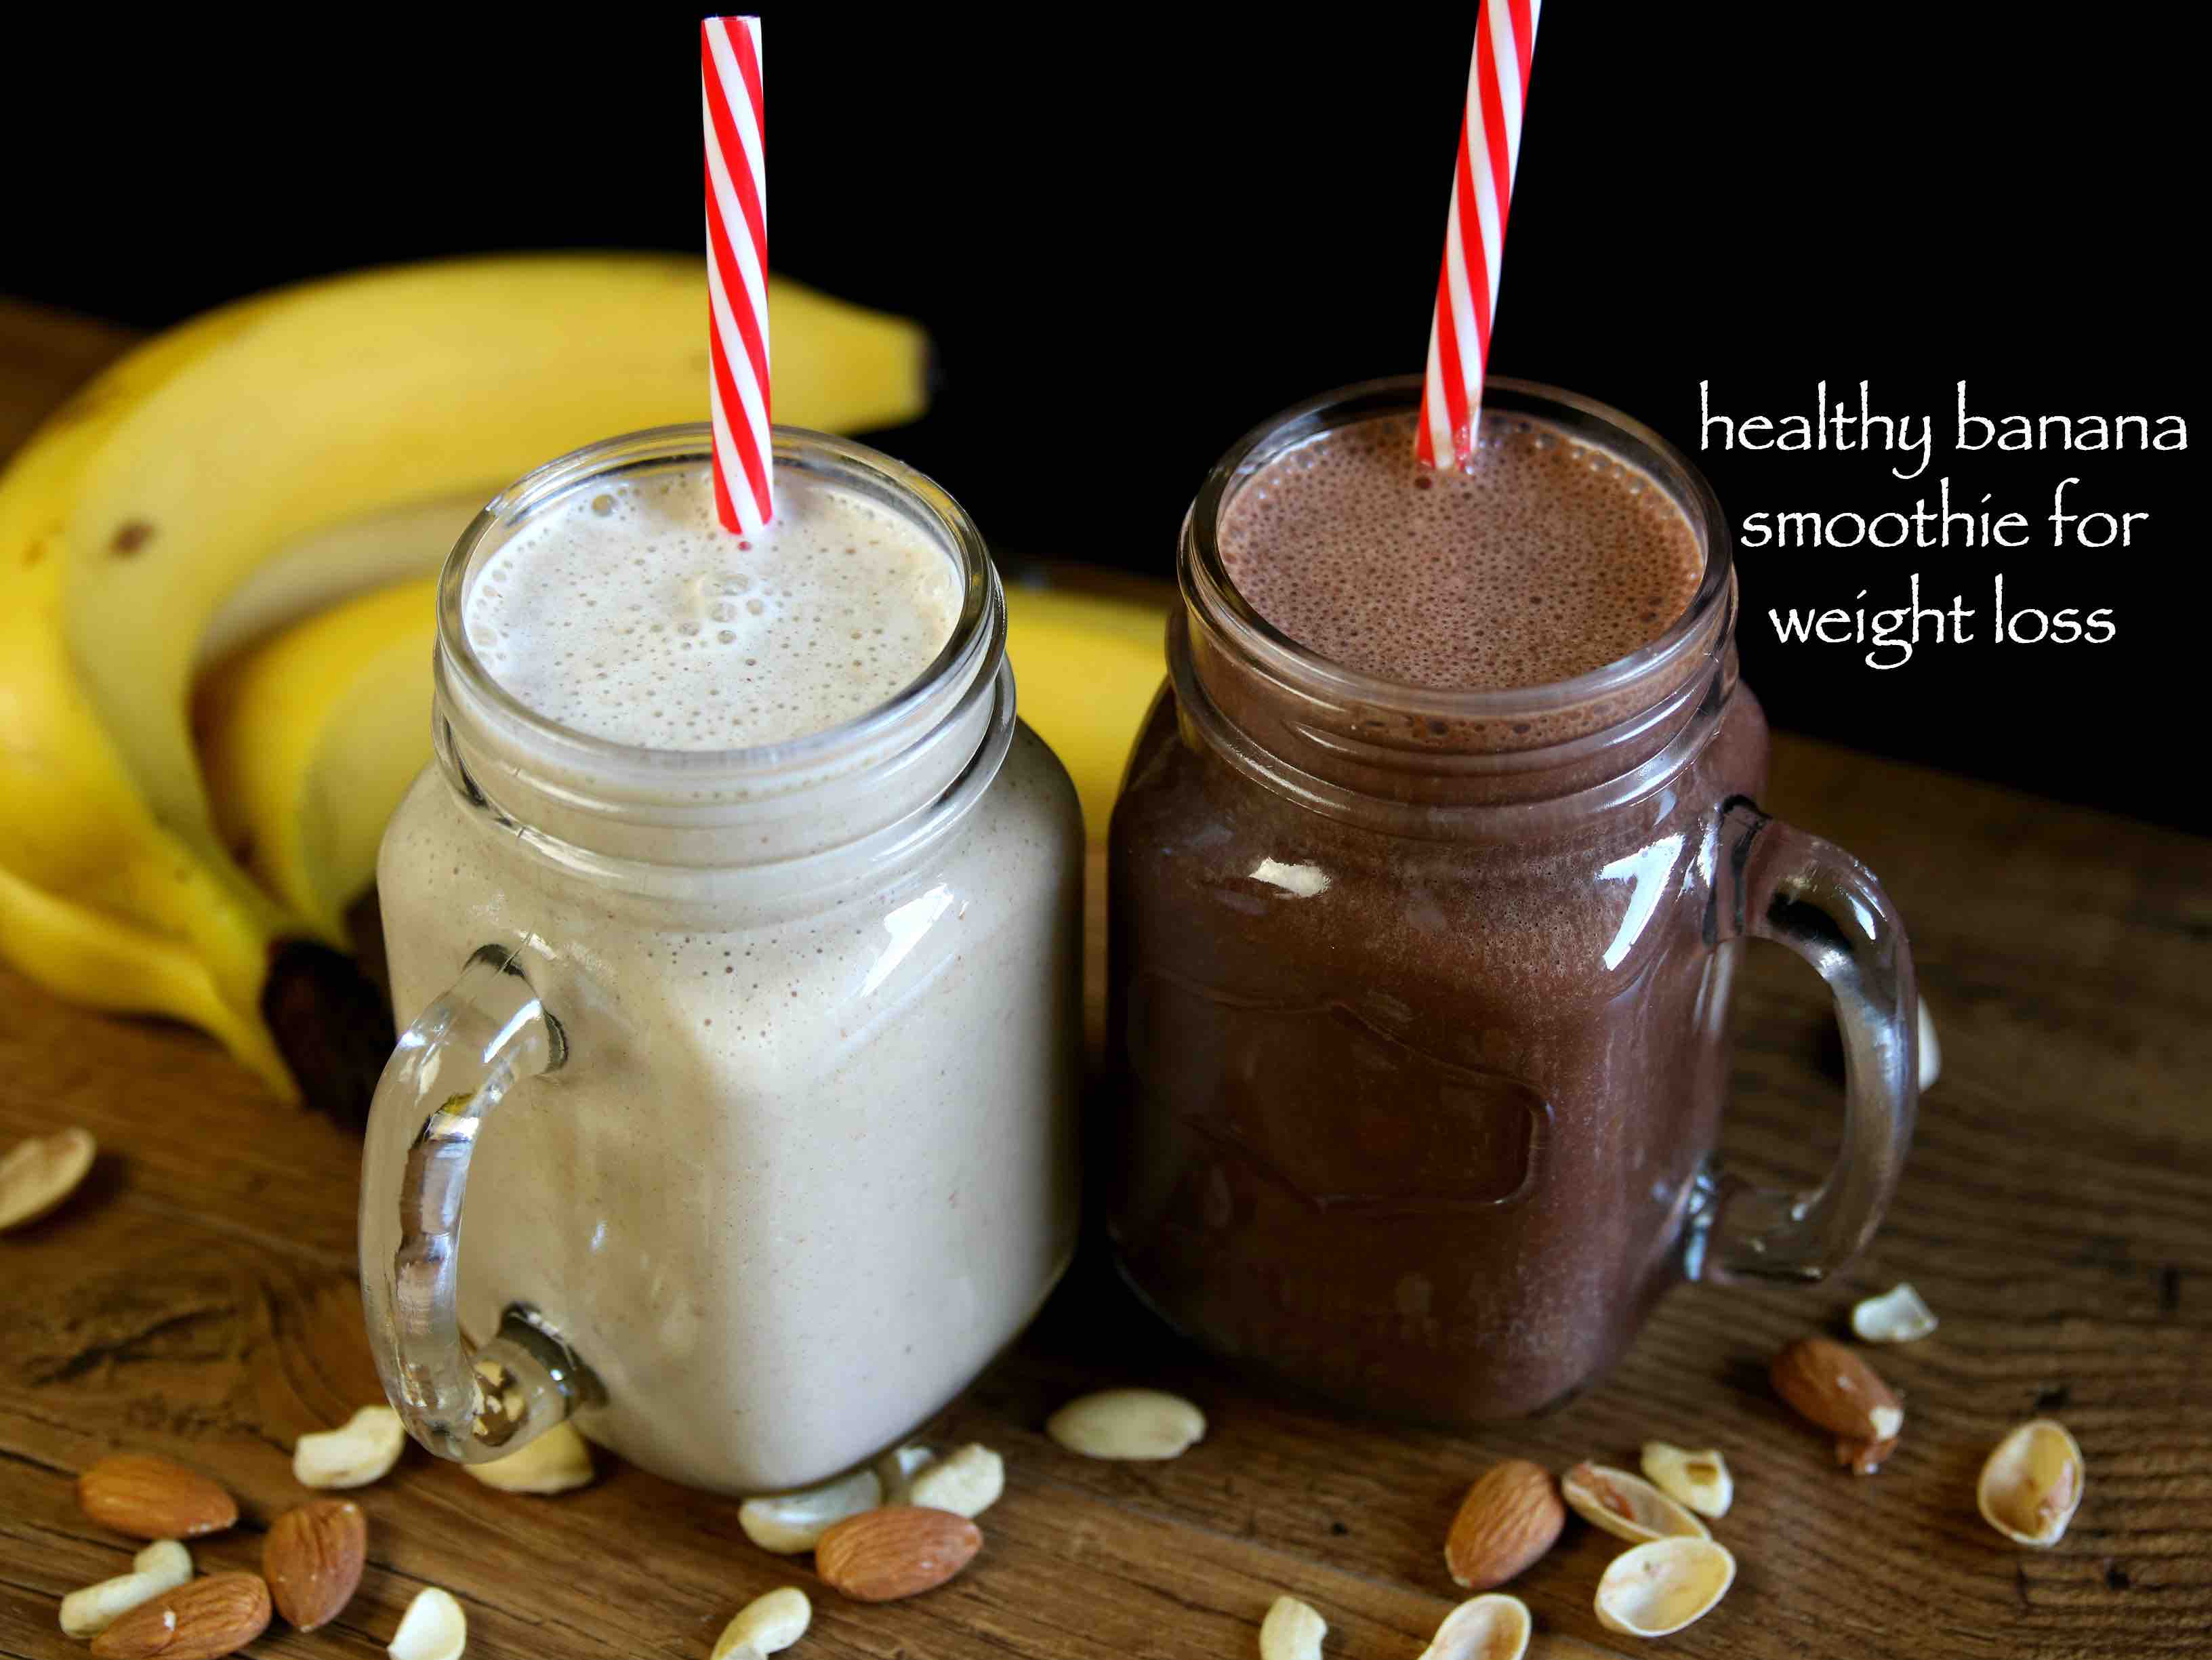 banana smoothie recipe | dates & chocolate smoothie | weight loss recipes